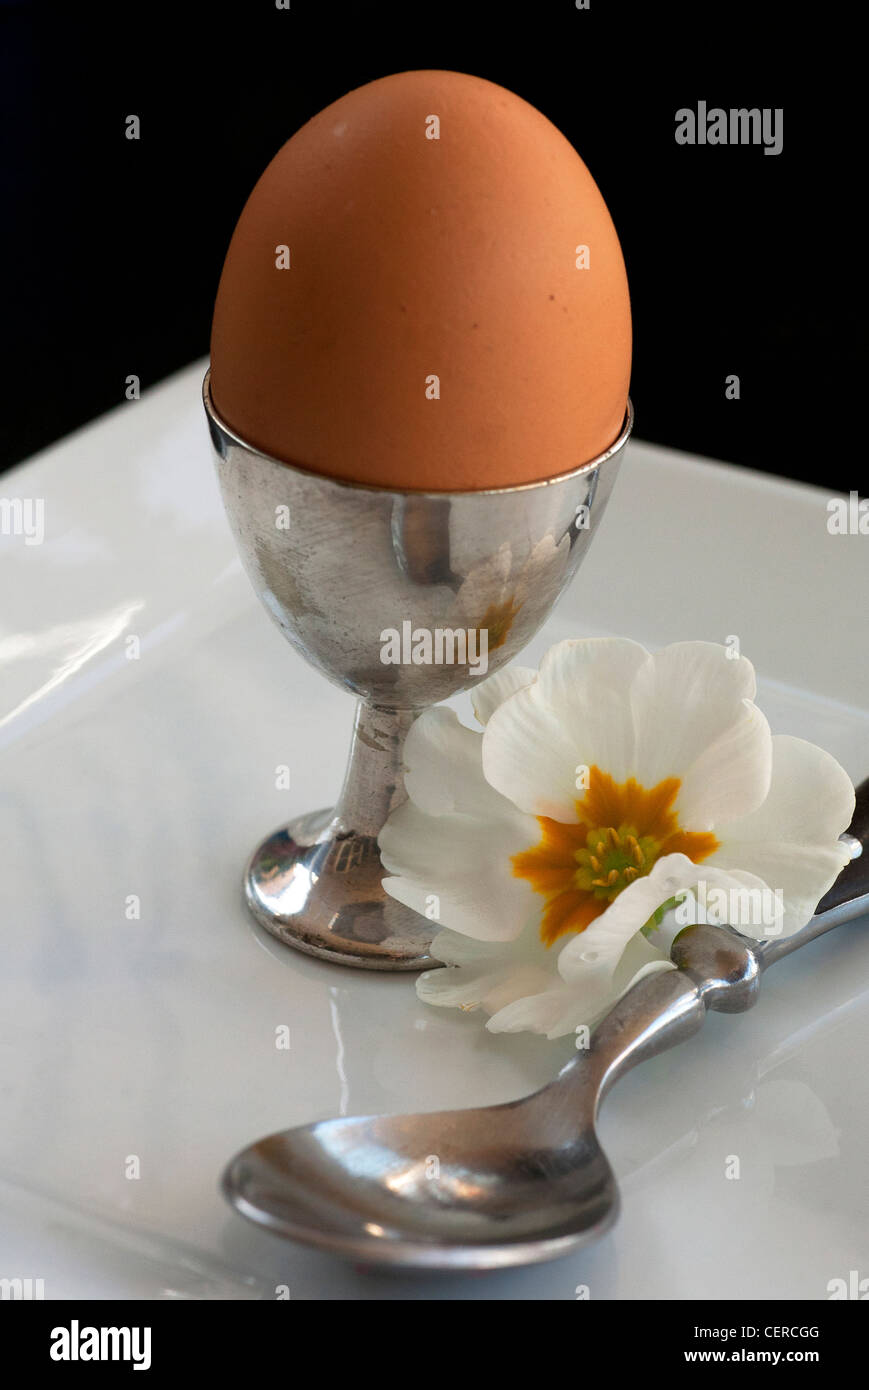 Go to work on an egg. Super breakfast Stock Photo